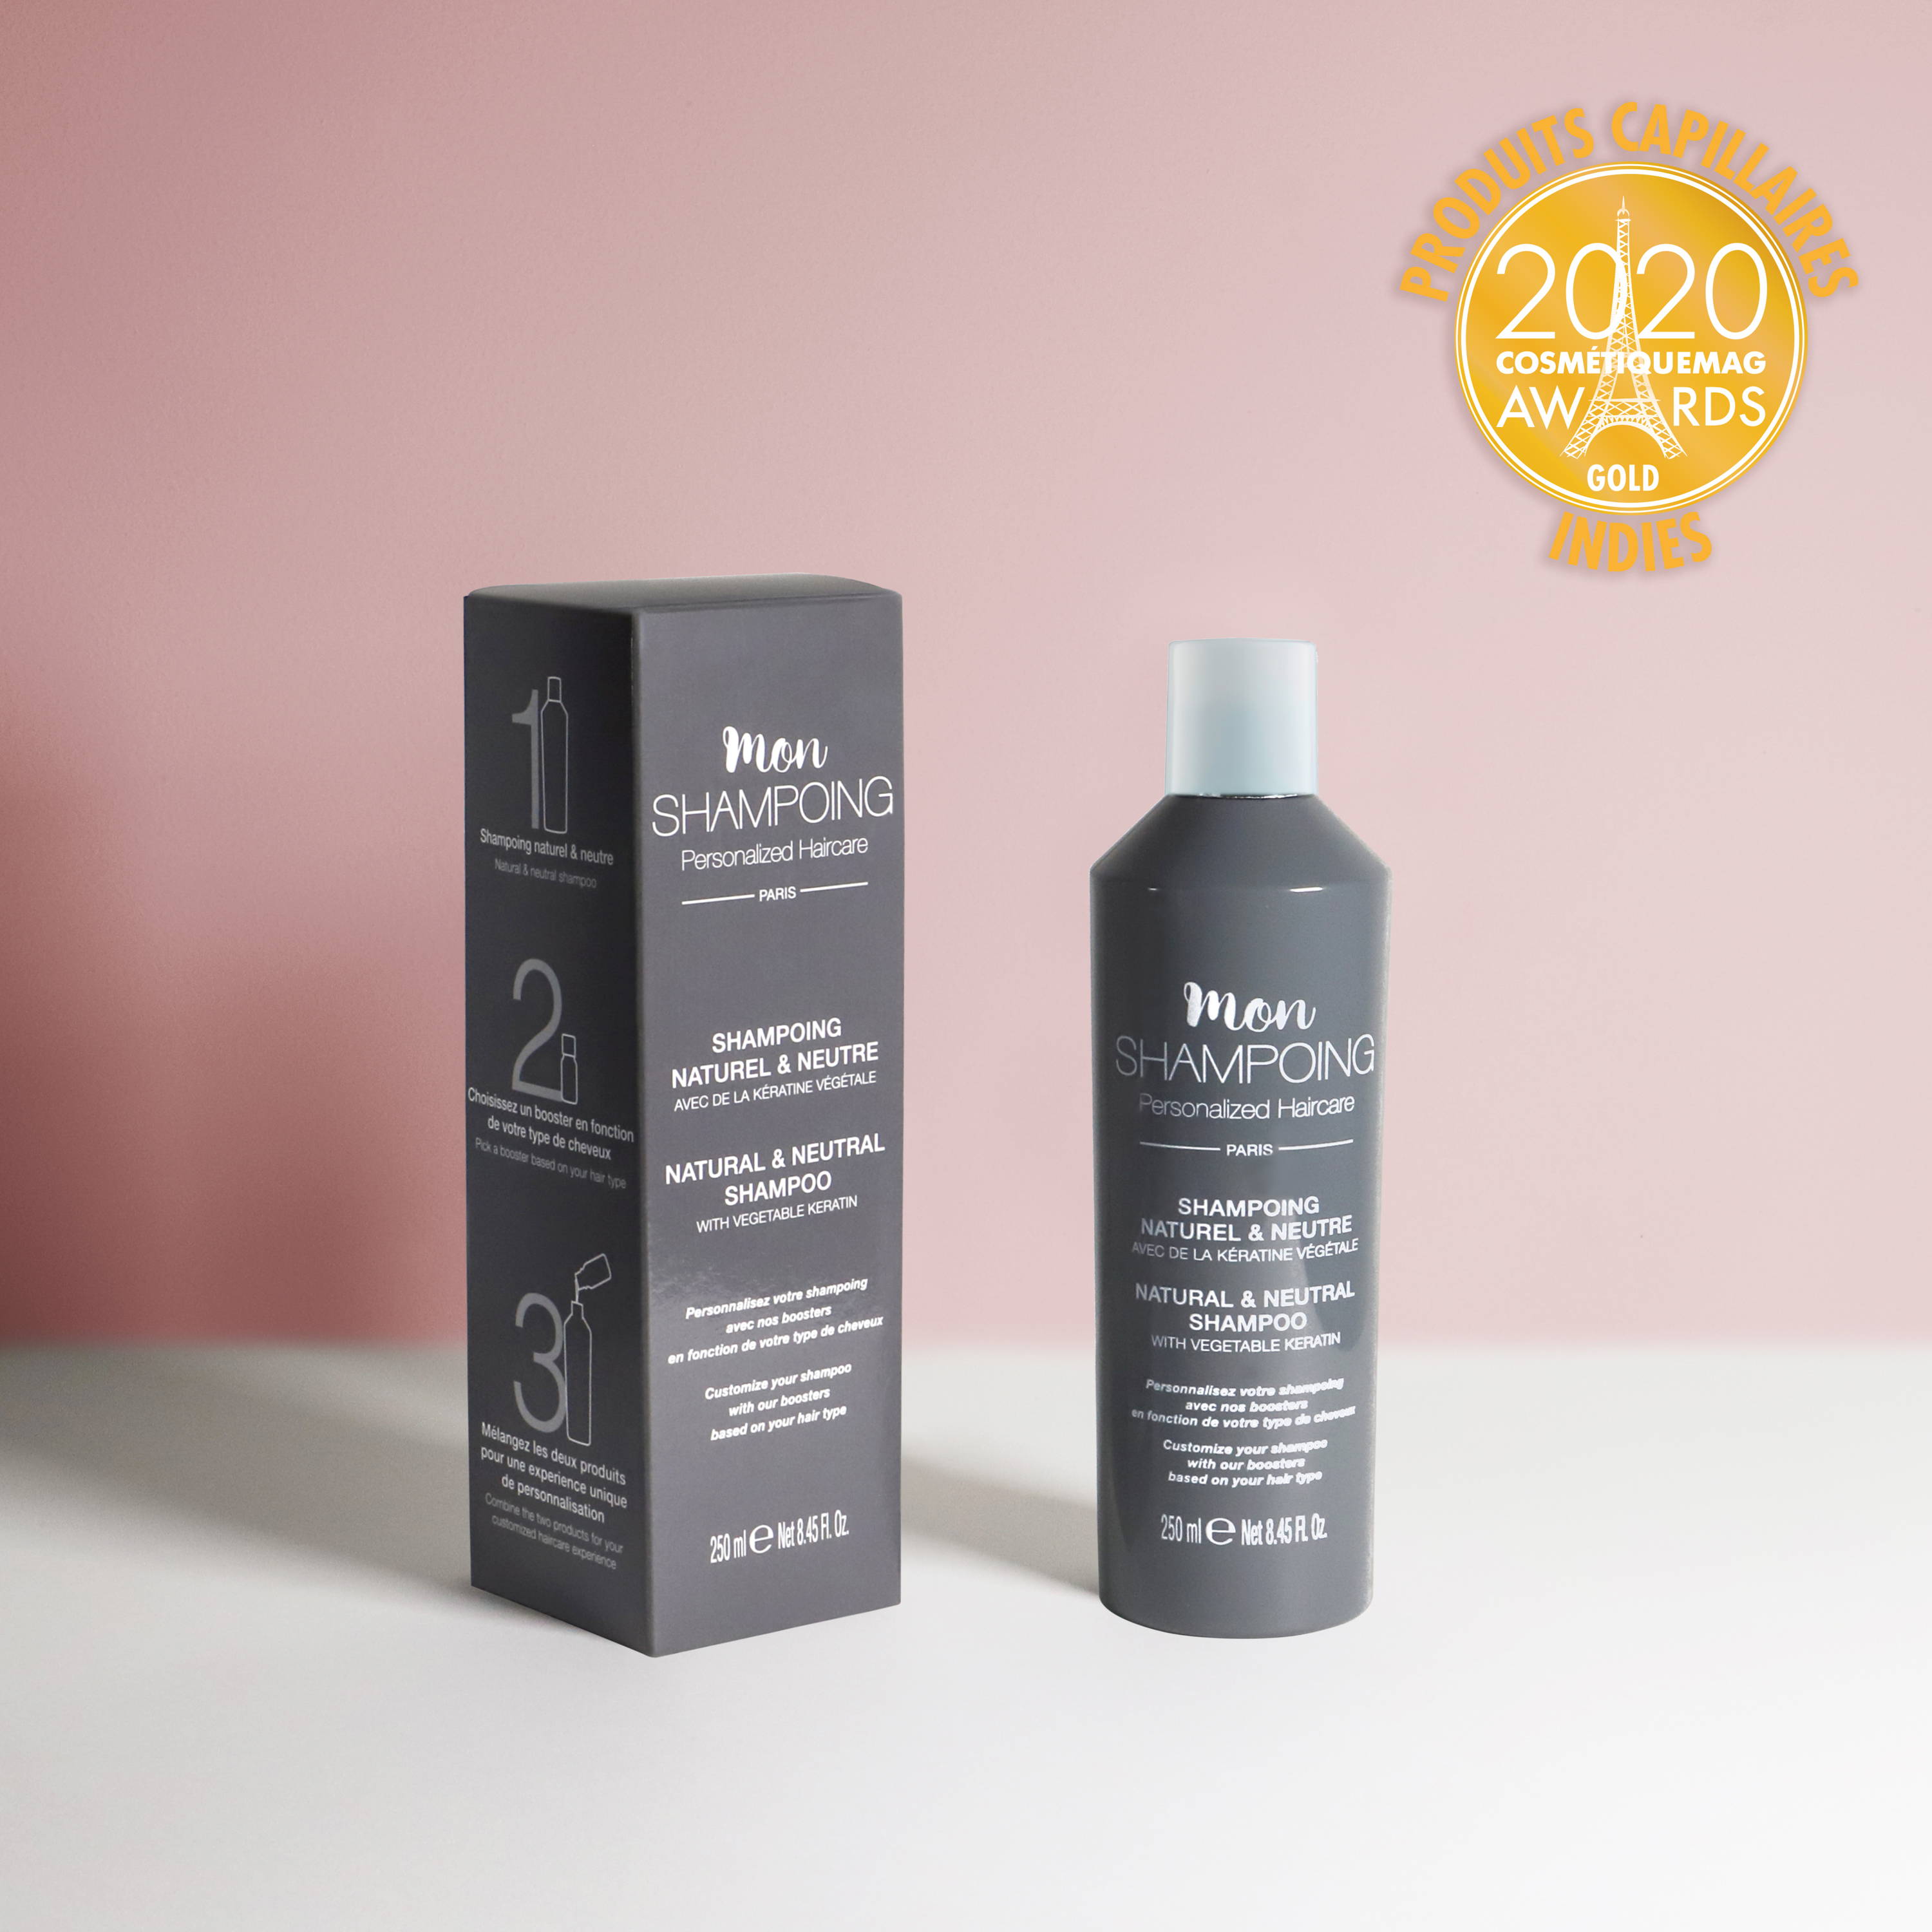 Mon Shampoing SLS/PARABEN/SILICONE FREE GENTLE SHAMPOO WITH 